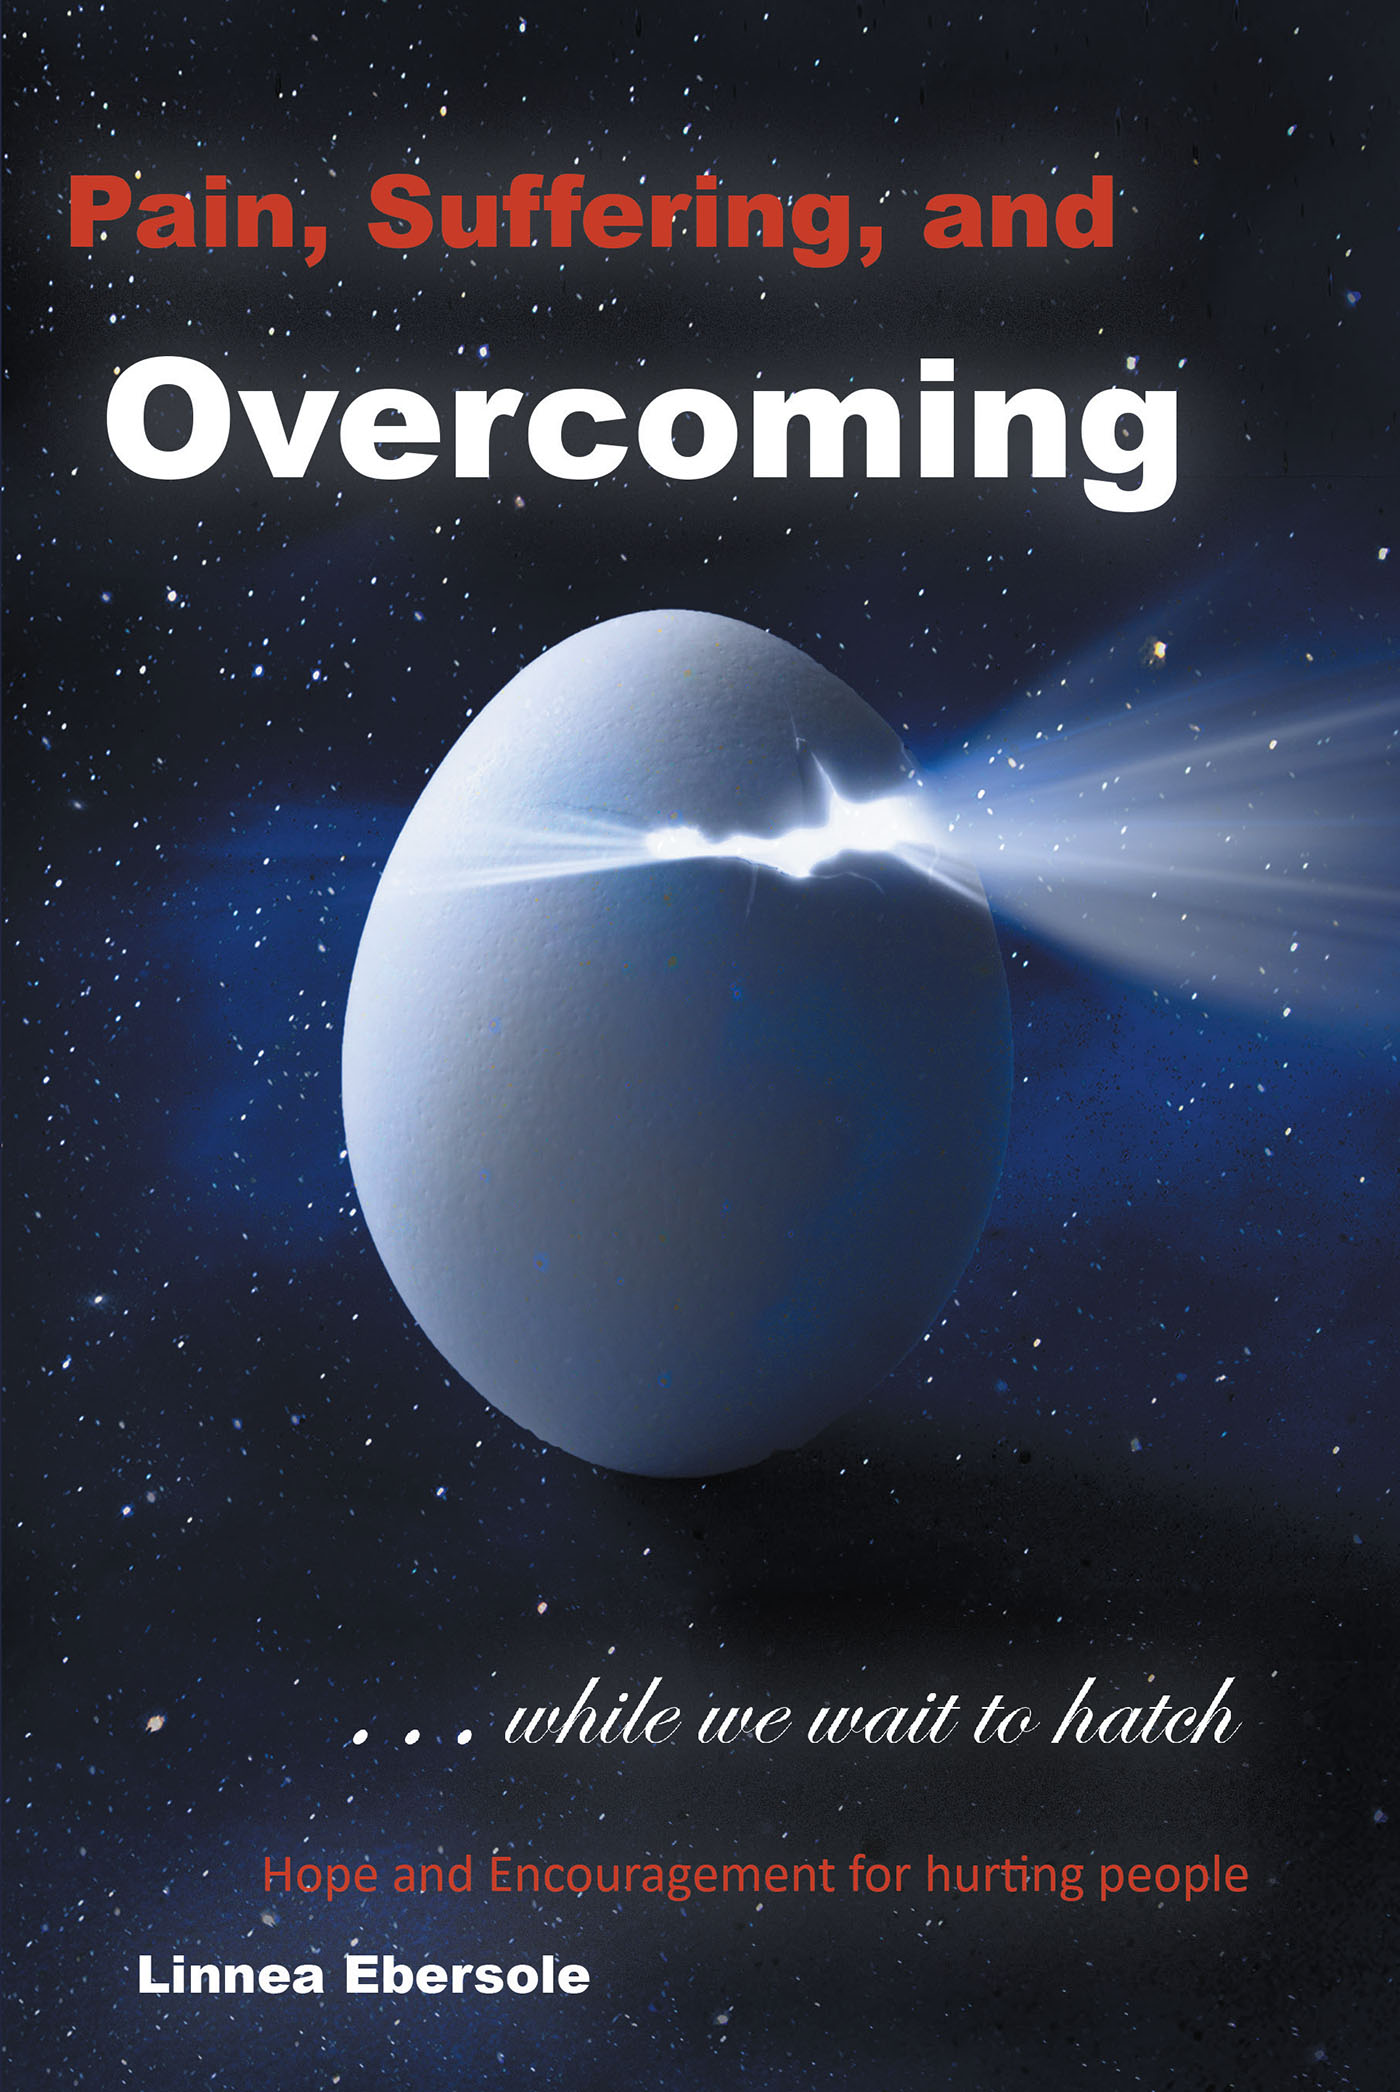 Linnea Ebersole’s New Book, "Pain, Suffering, and Overcoming While We Wait to Hatch," is a Faith-Based Exploration of How Suffering Can Help Prepare One for Heaven